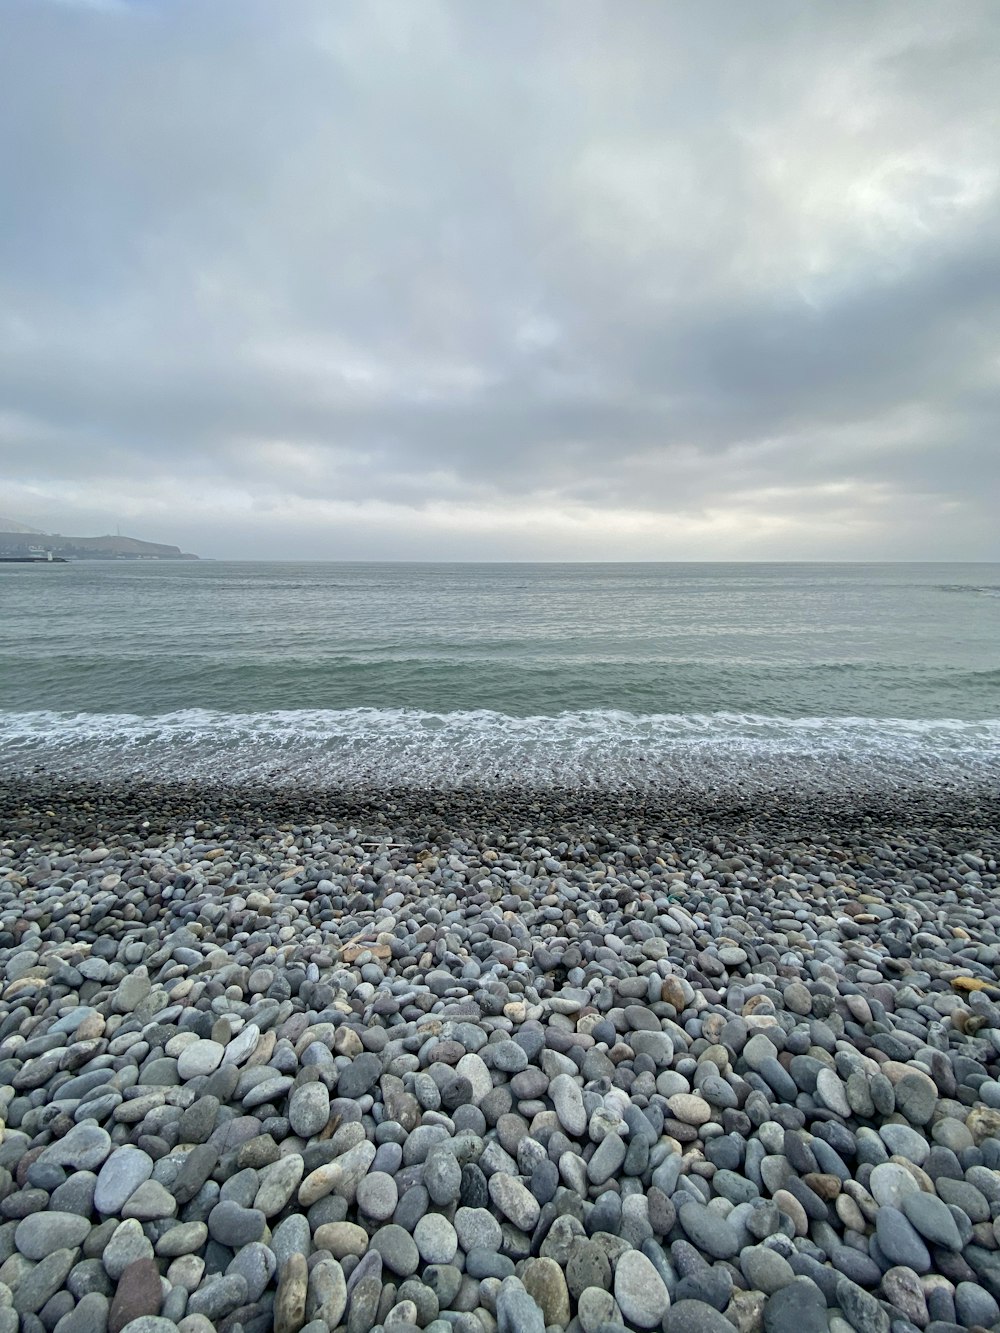 gray and white pebbles on seashore under cloudy sky during daytime